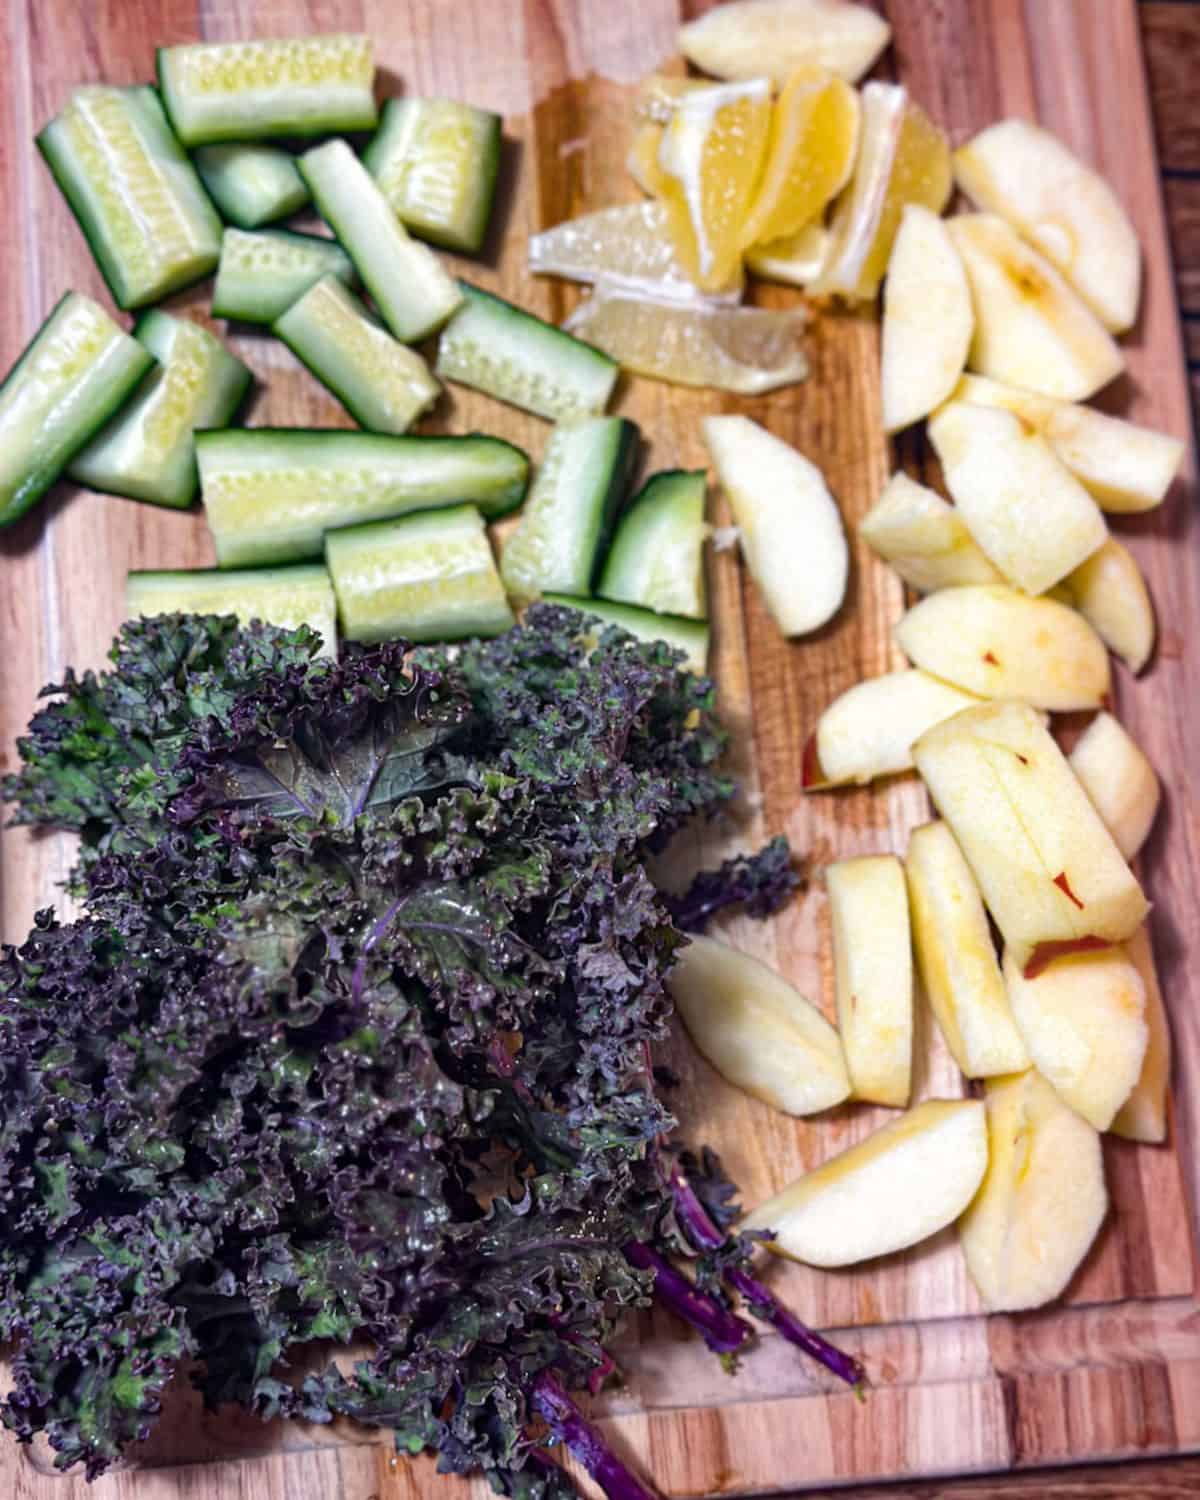 Purple kale leaves, chopped apples, chopped cucumbers, and chopped lemon without the rind sit on a wooden cutting board.